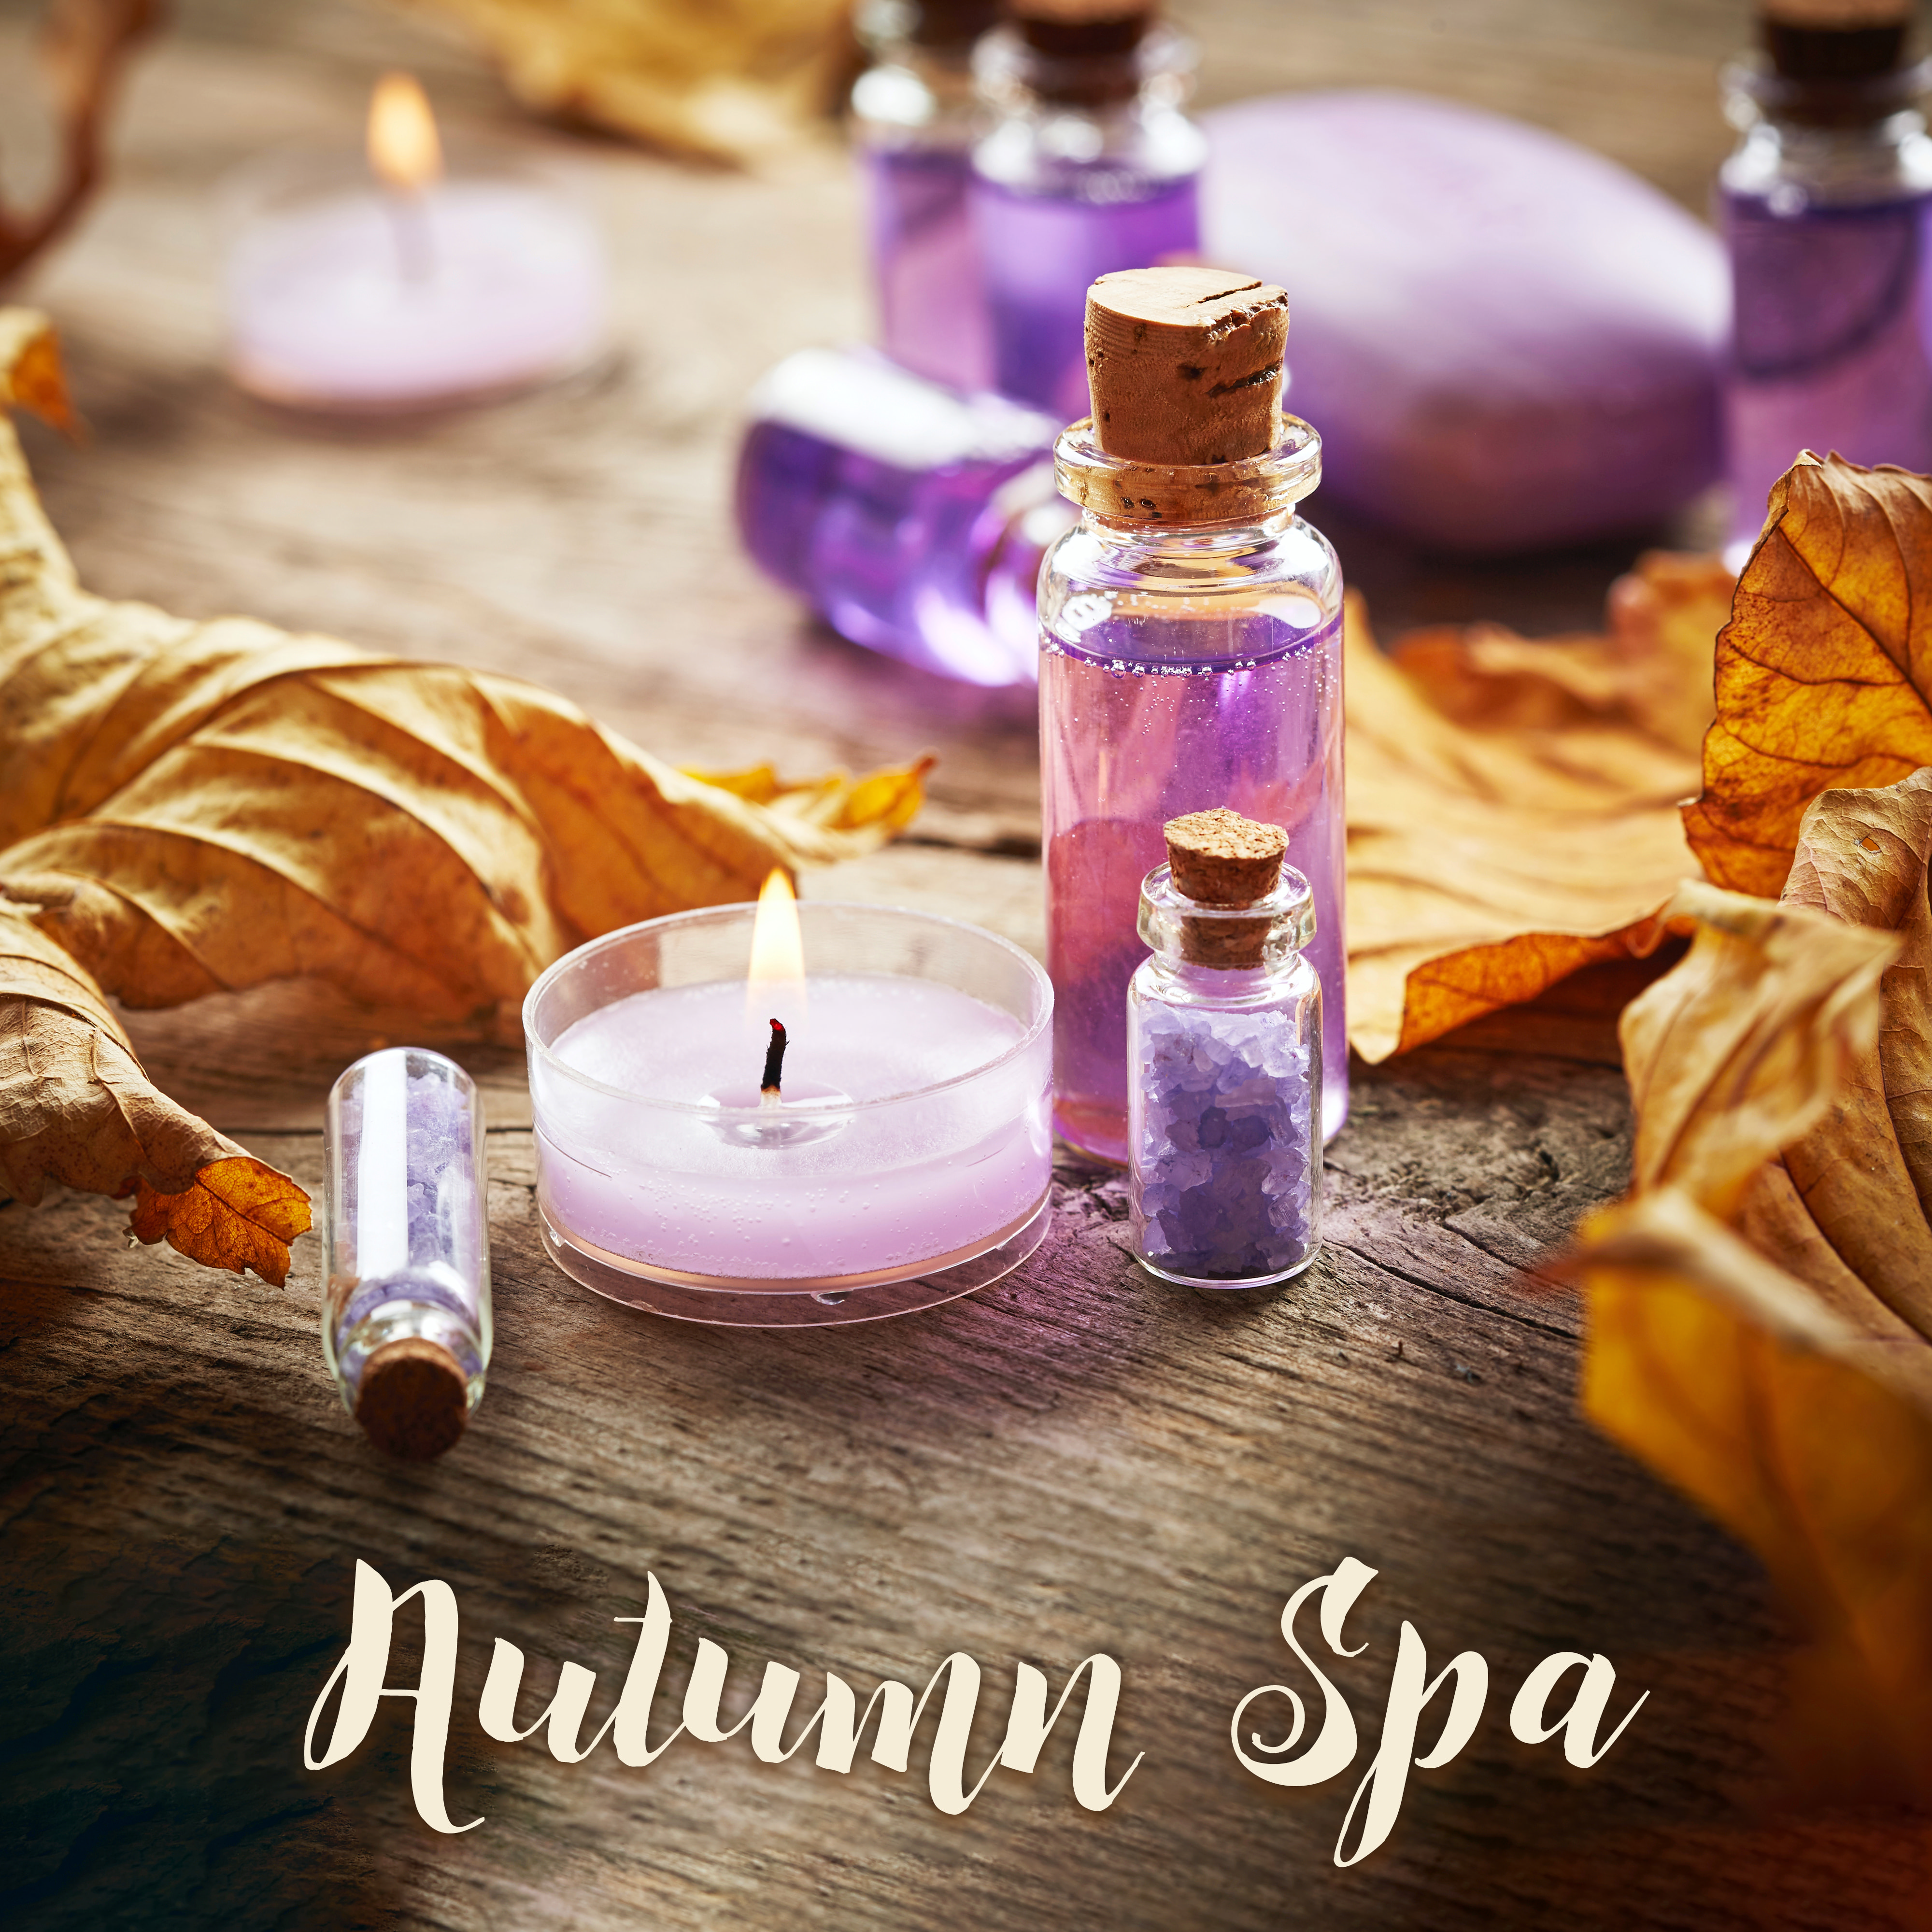 Autumn Spa – Peaceful New Age, Relaxing Music for Massage, Sensual Touch, Spa Music, Day for Your Beauty, Moments of Relaxation